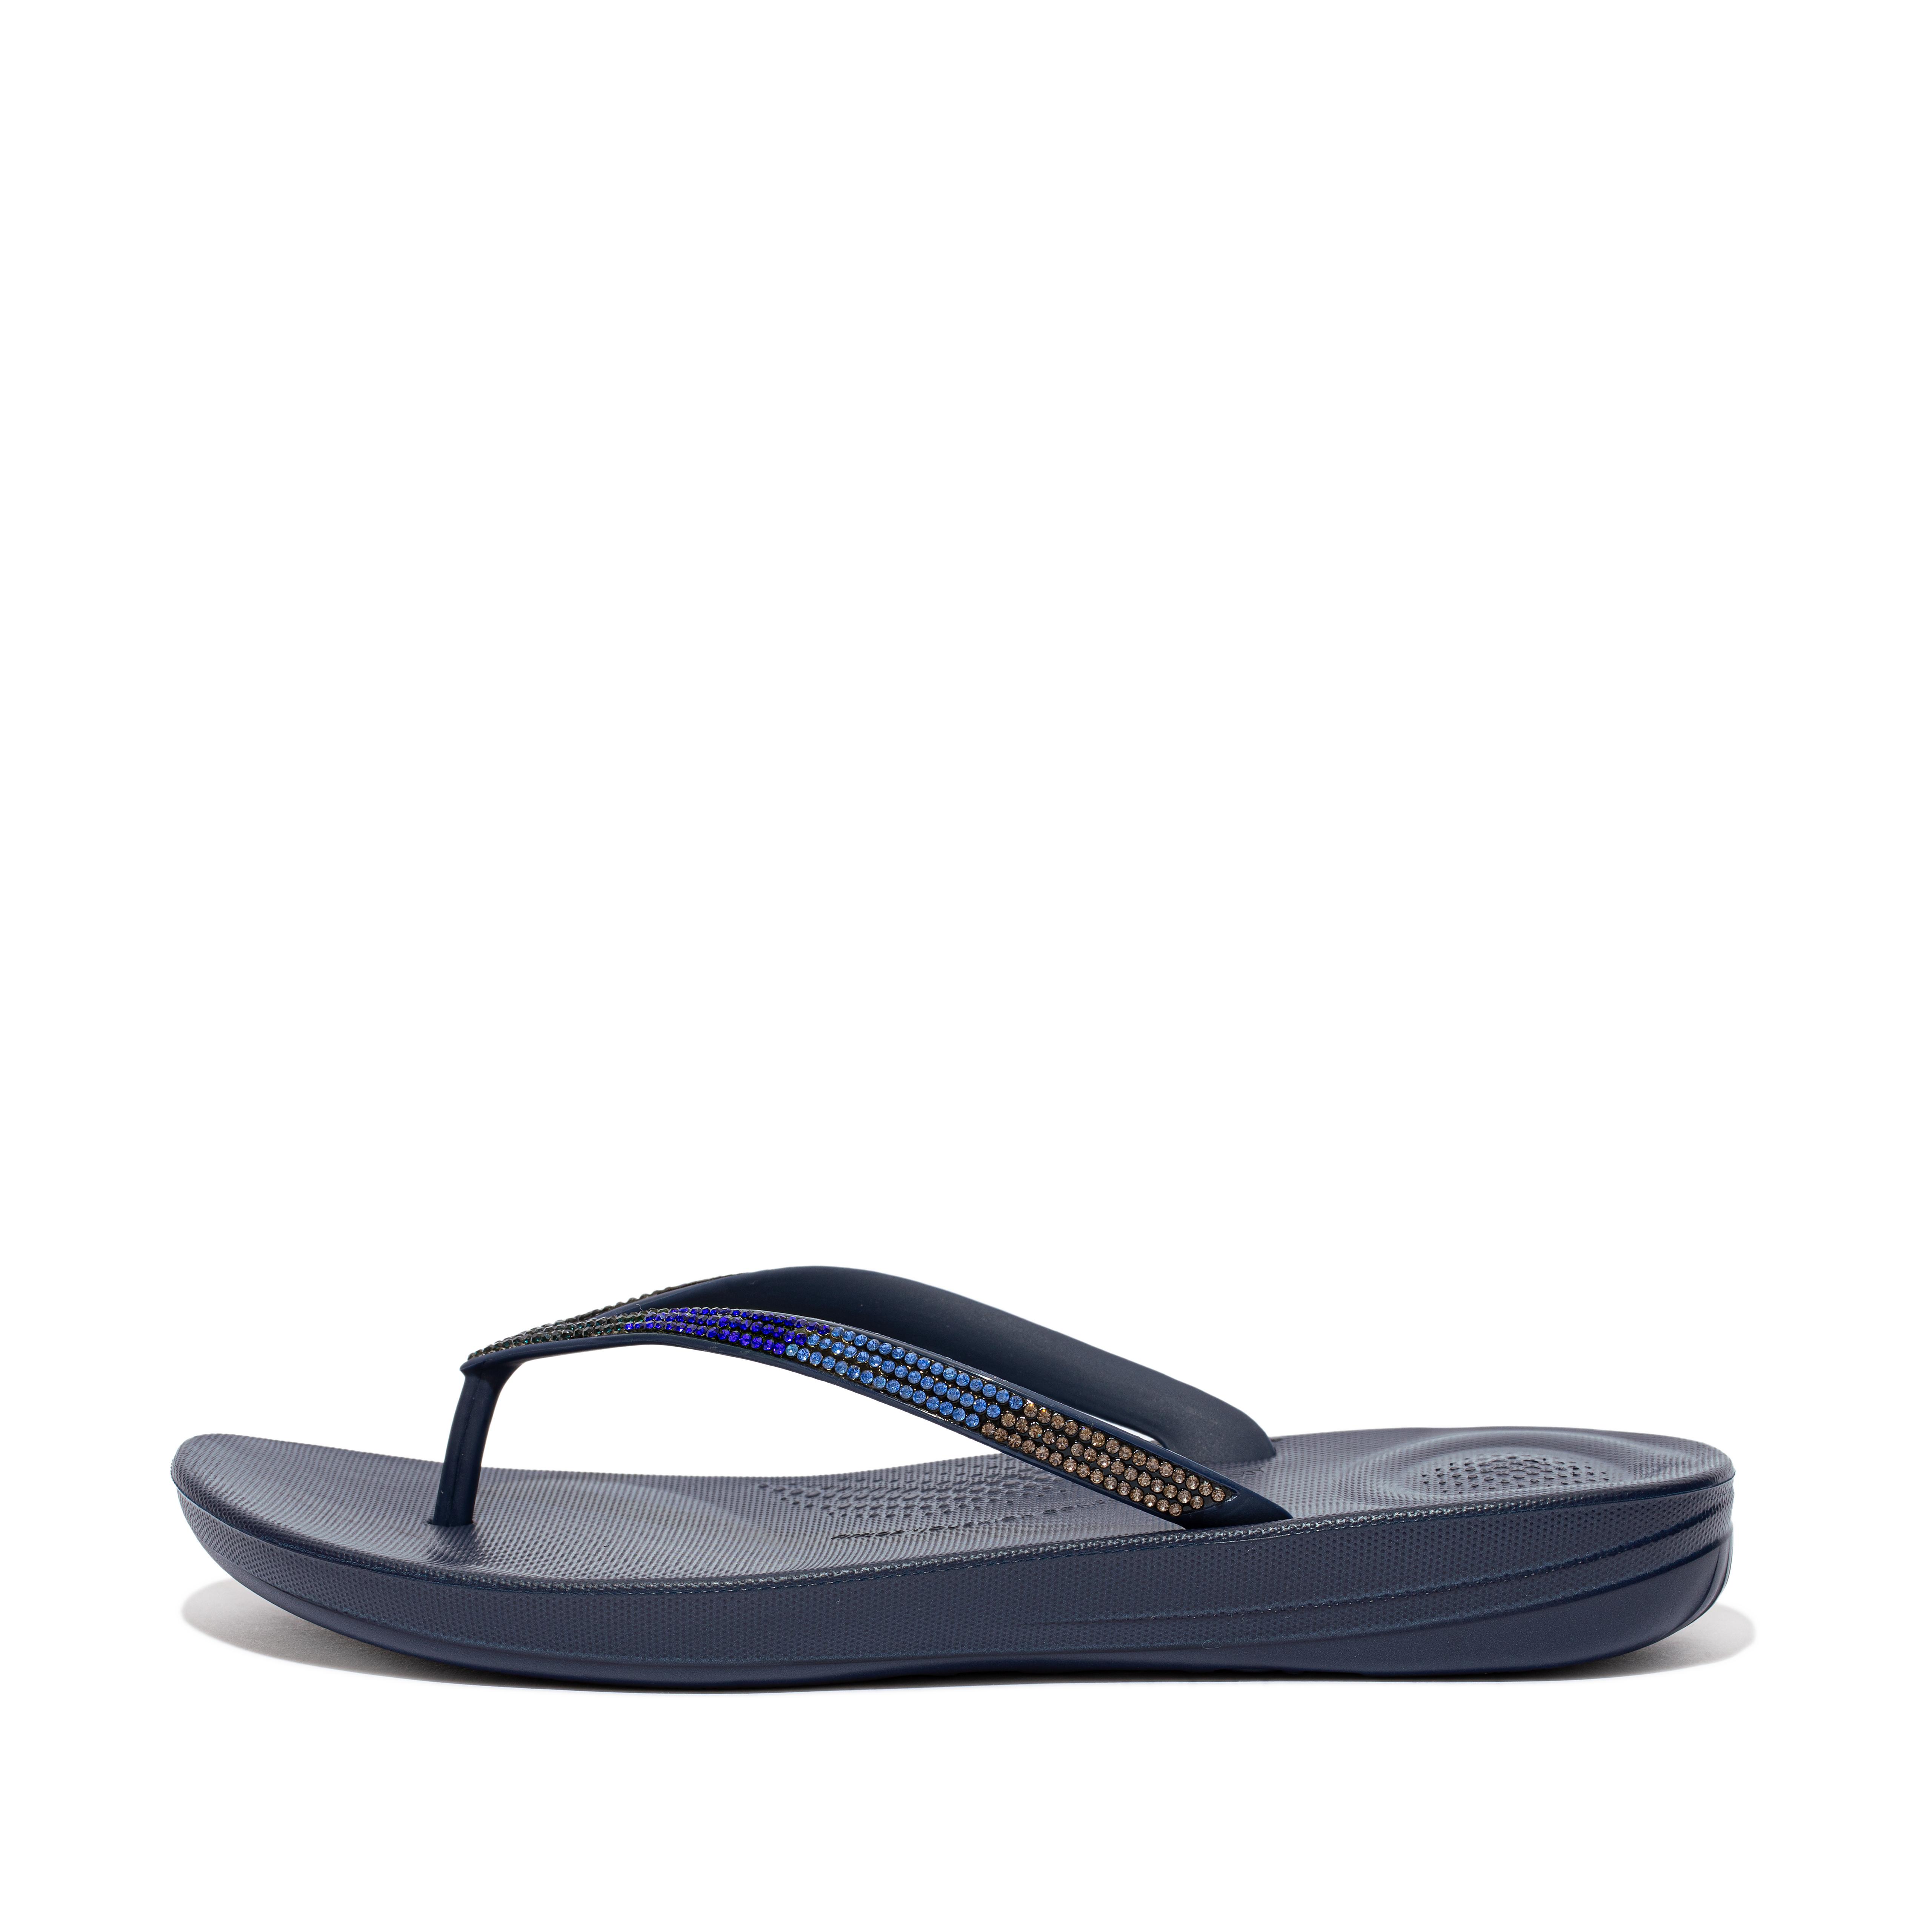 Fitflop Ombre Sparkle Flip-Flops,Midnight Navy